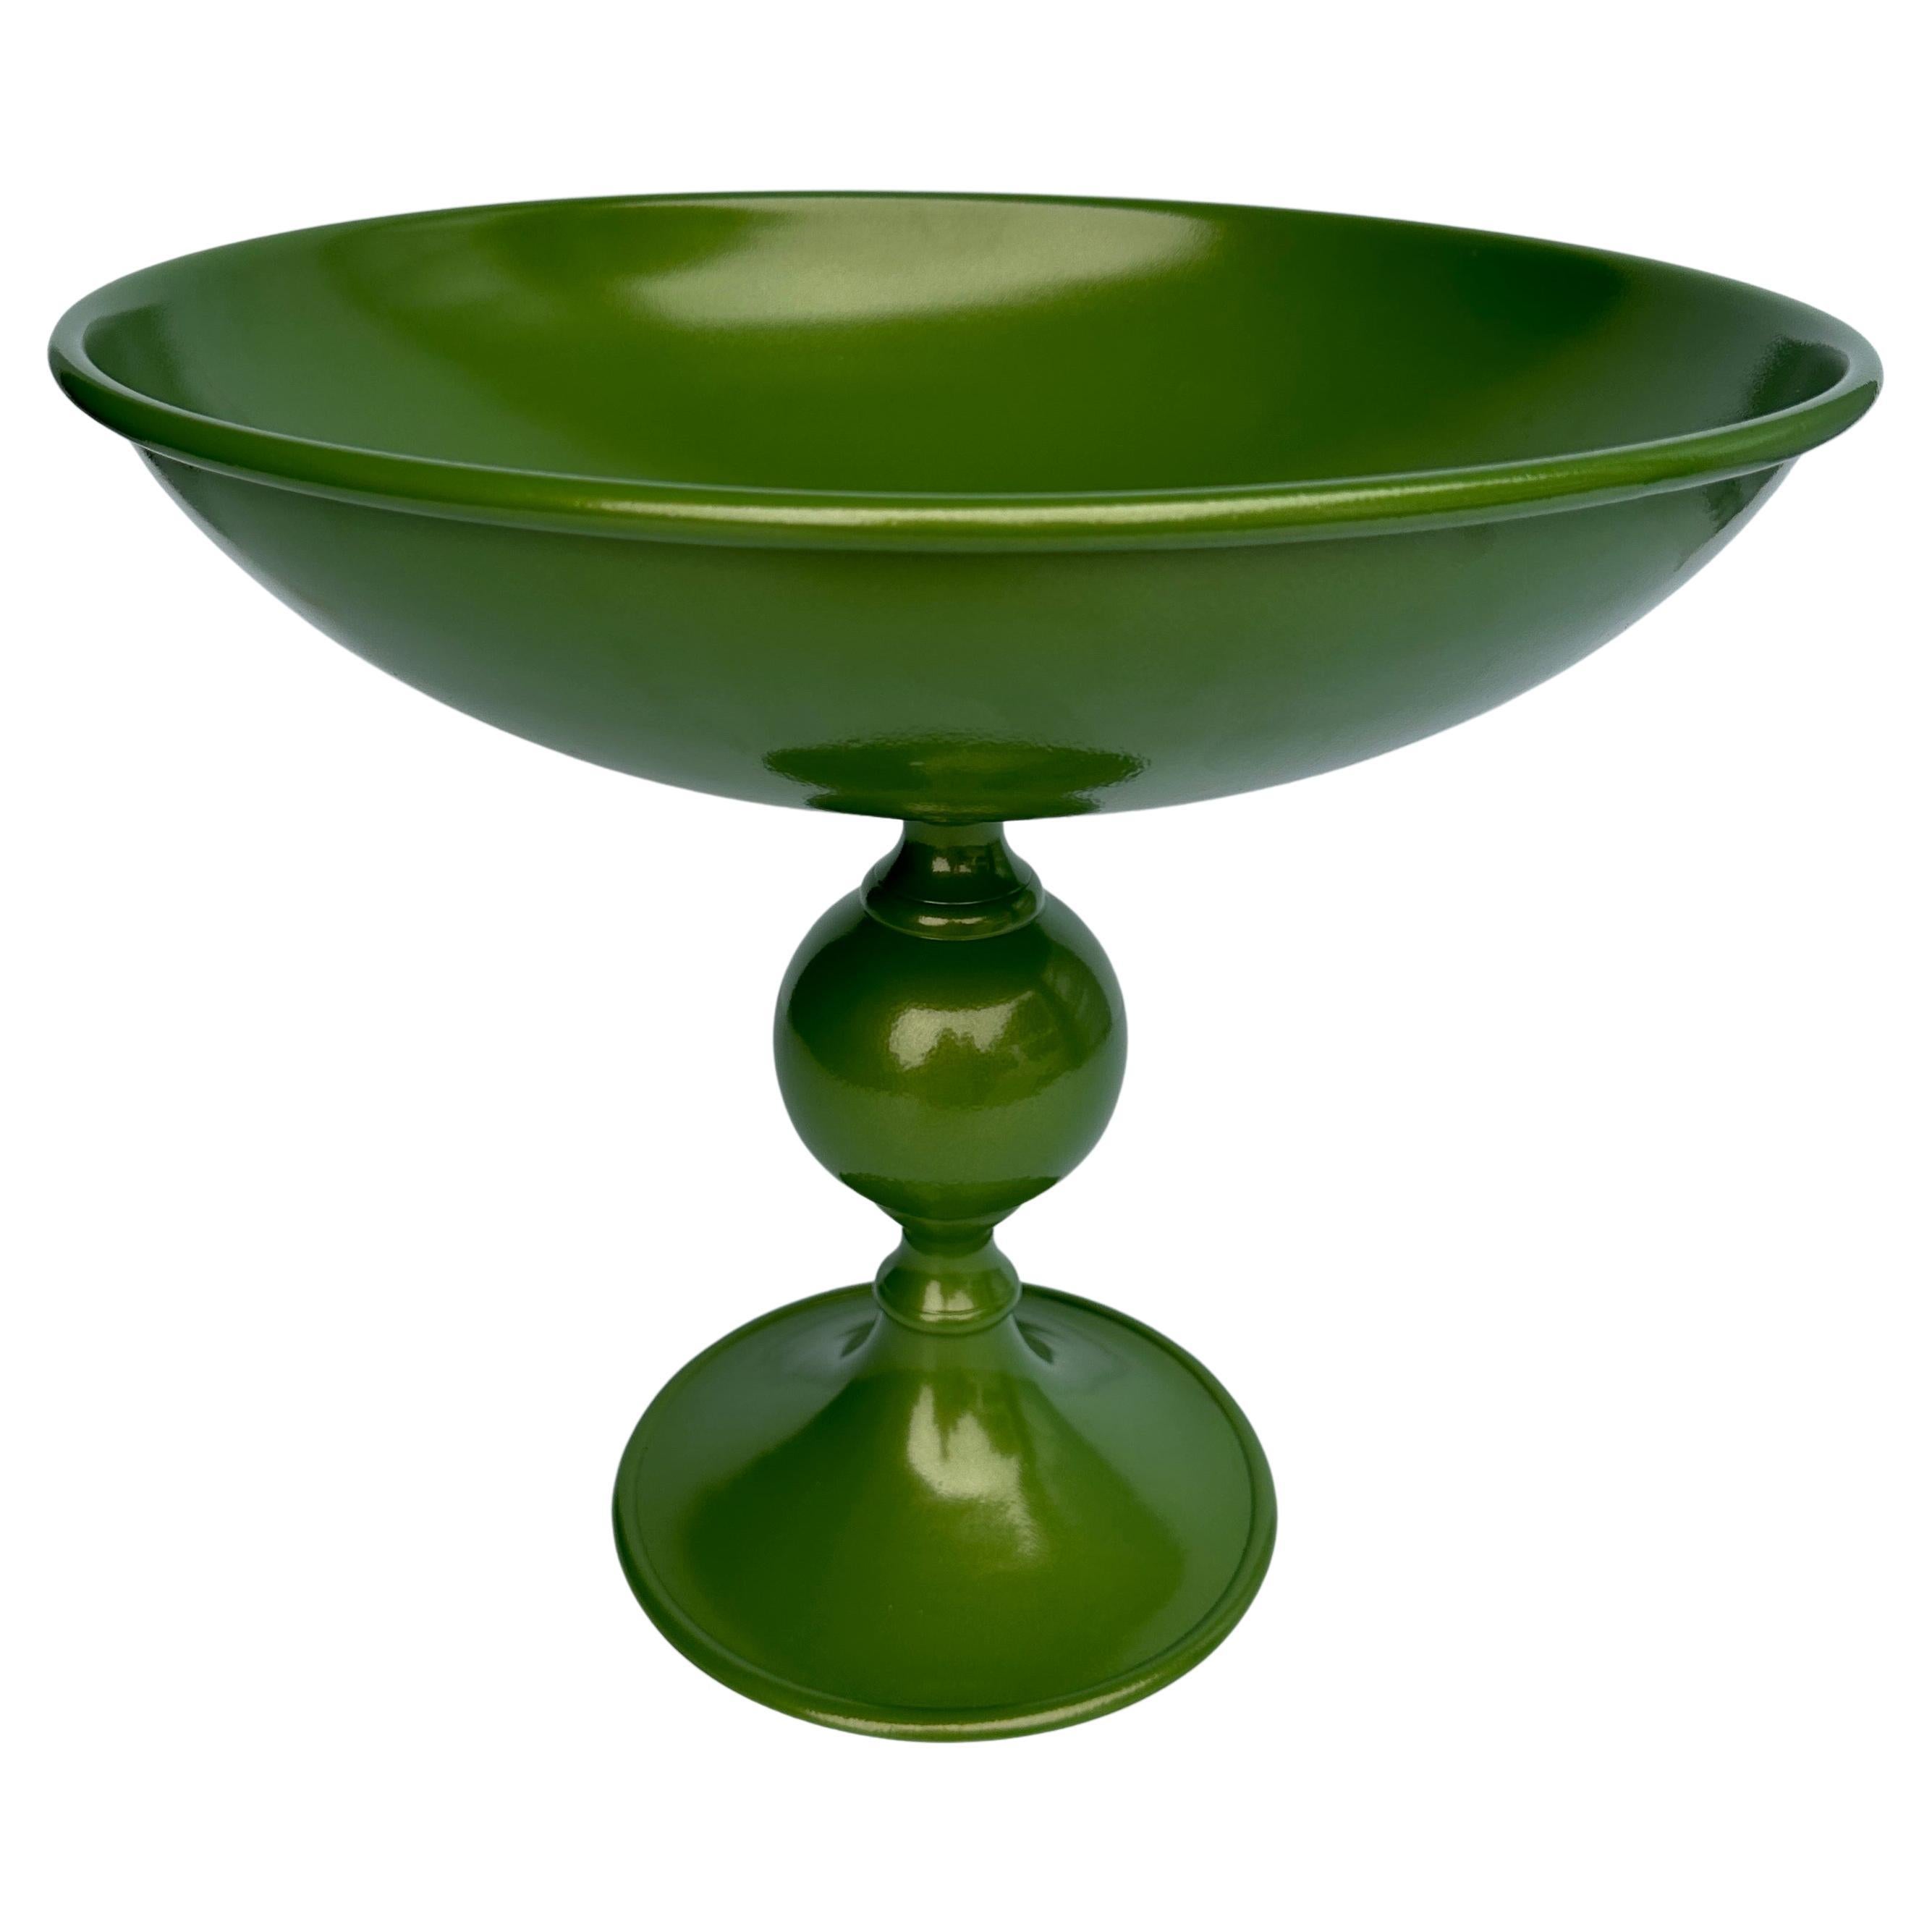 Vintage Large Metal Centerpiece Bowl, Powder-Coated Green In Good Condition For Sale In Haddonfield, NJ